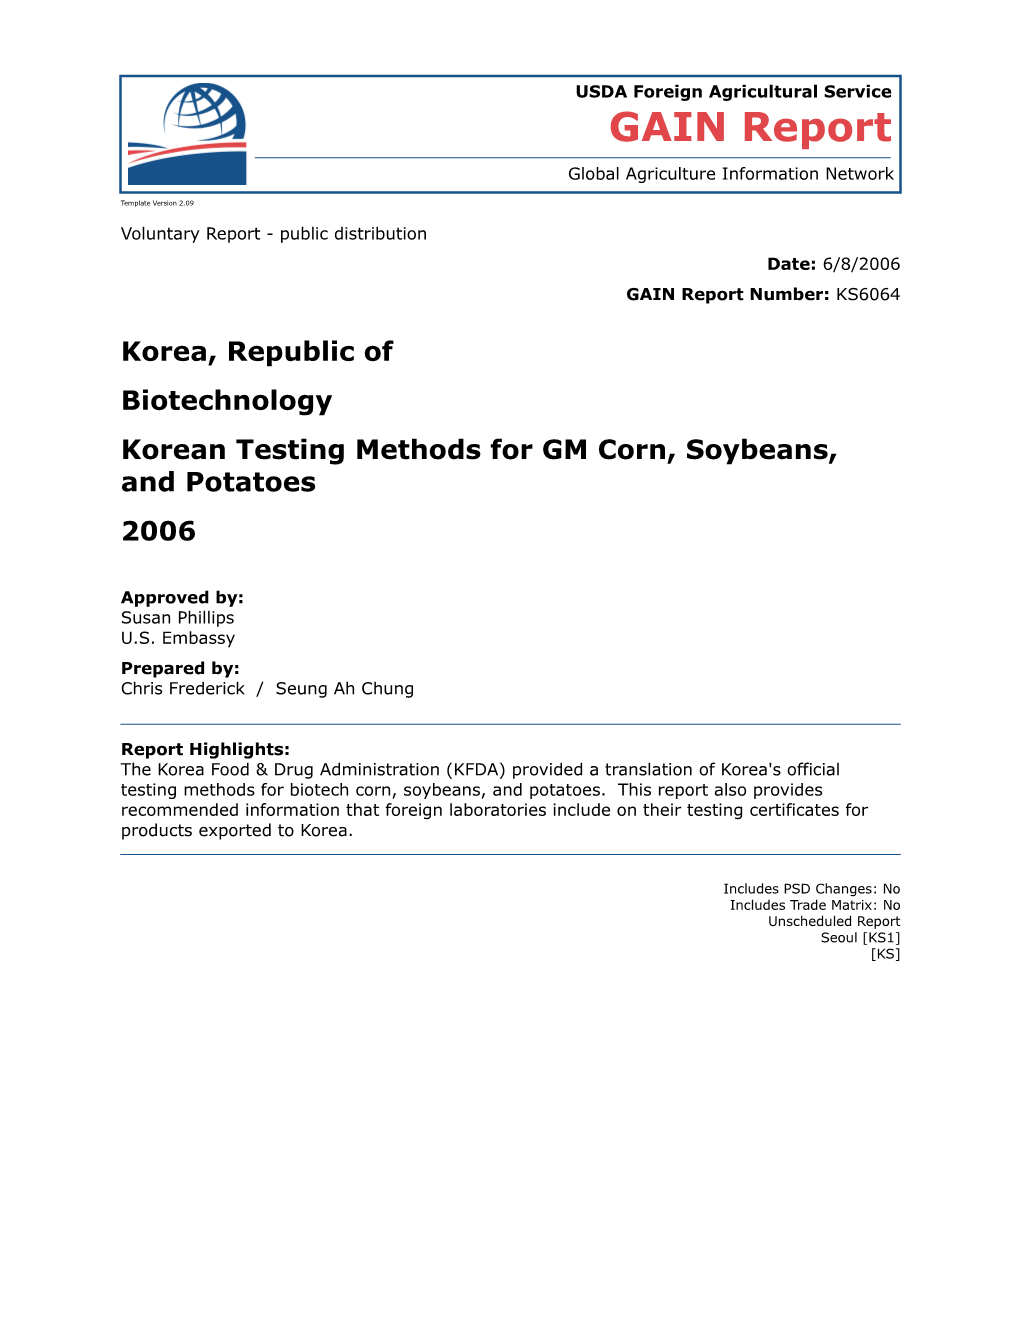 Korean Testing Methods for GM Corn, Soybeans, and Potatoes